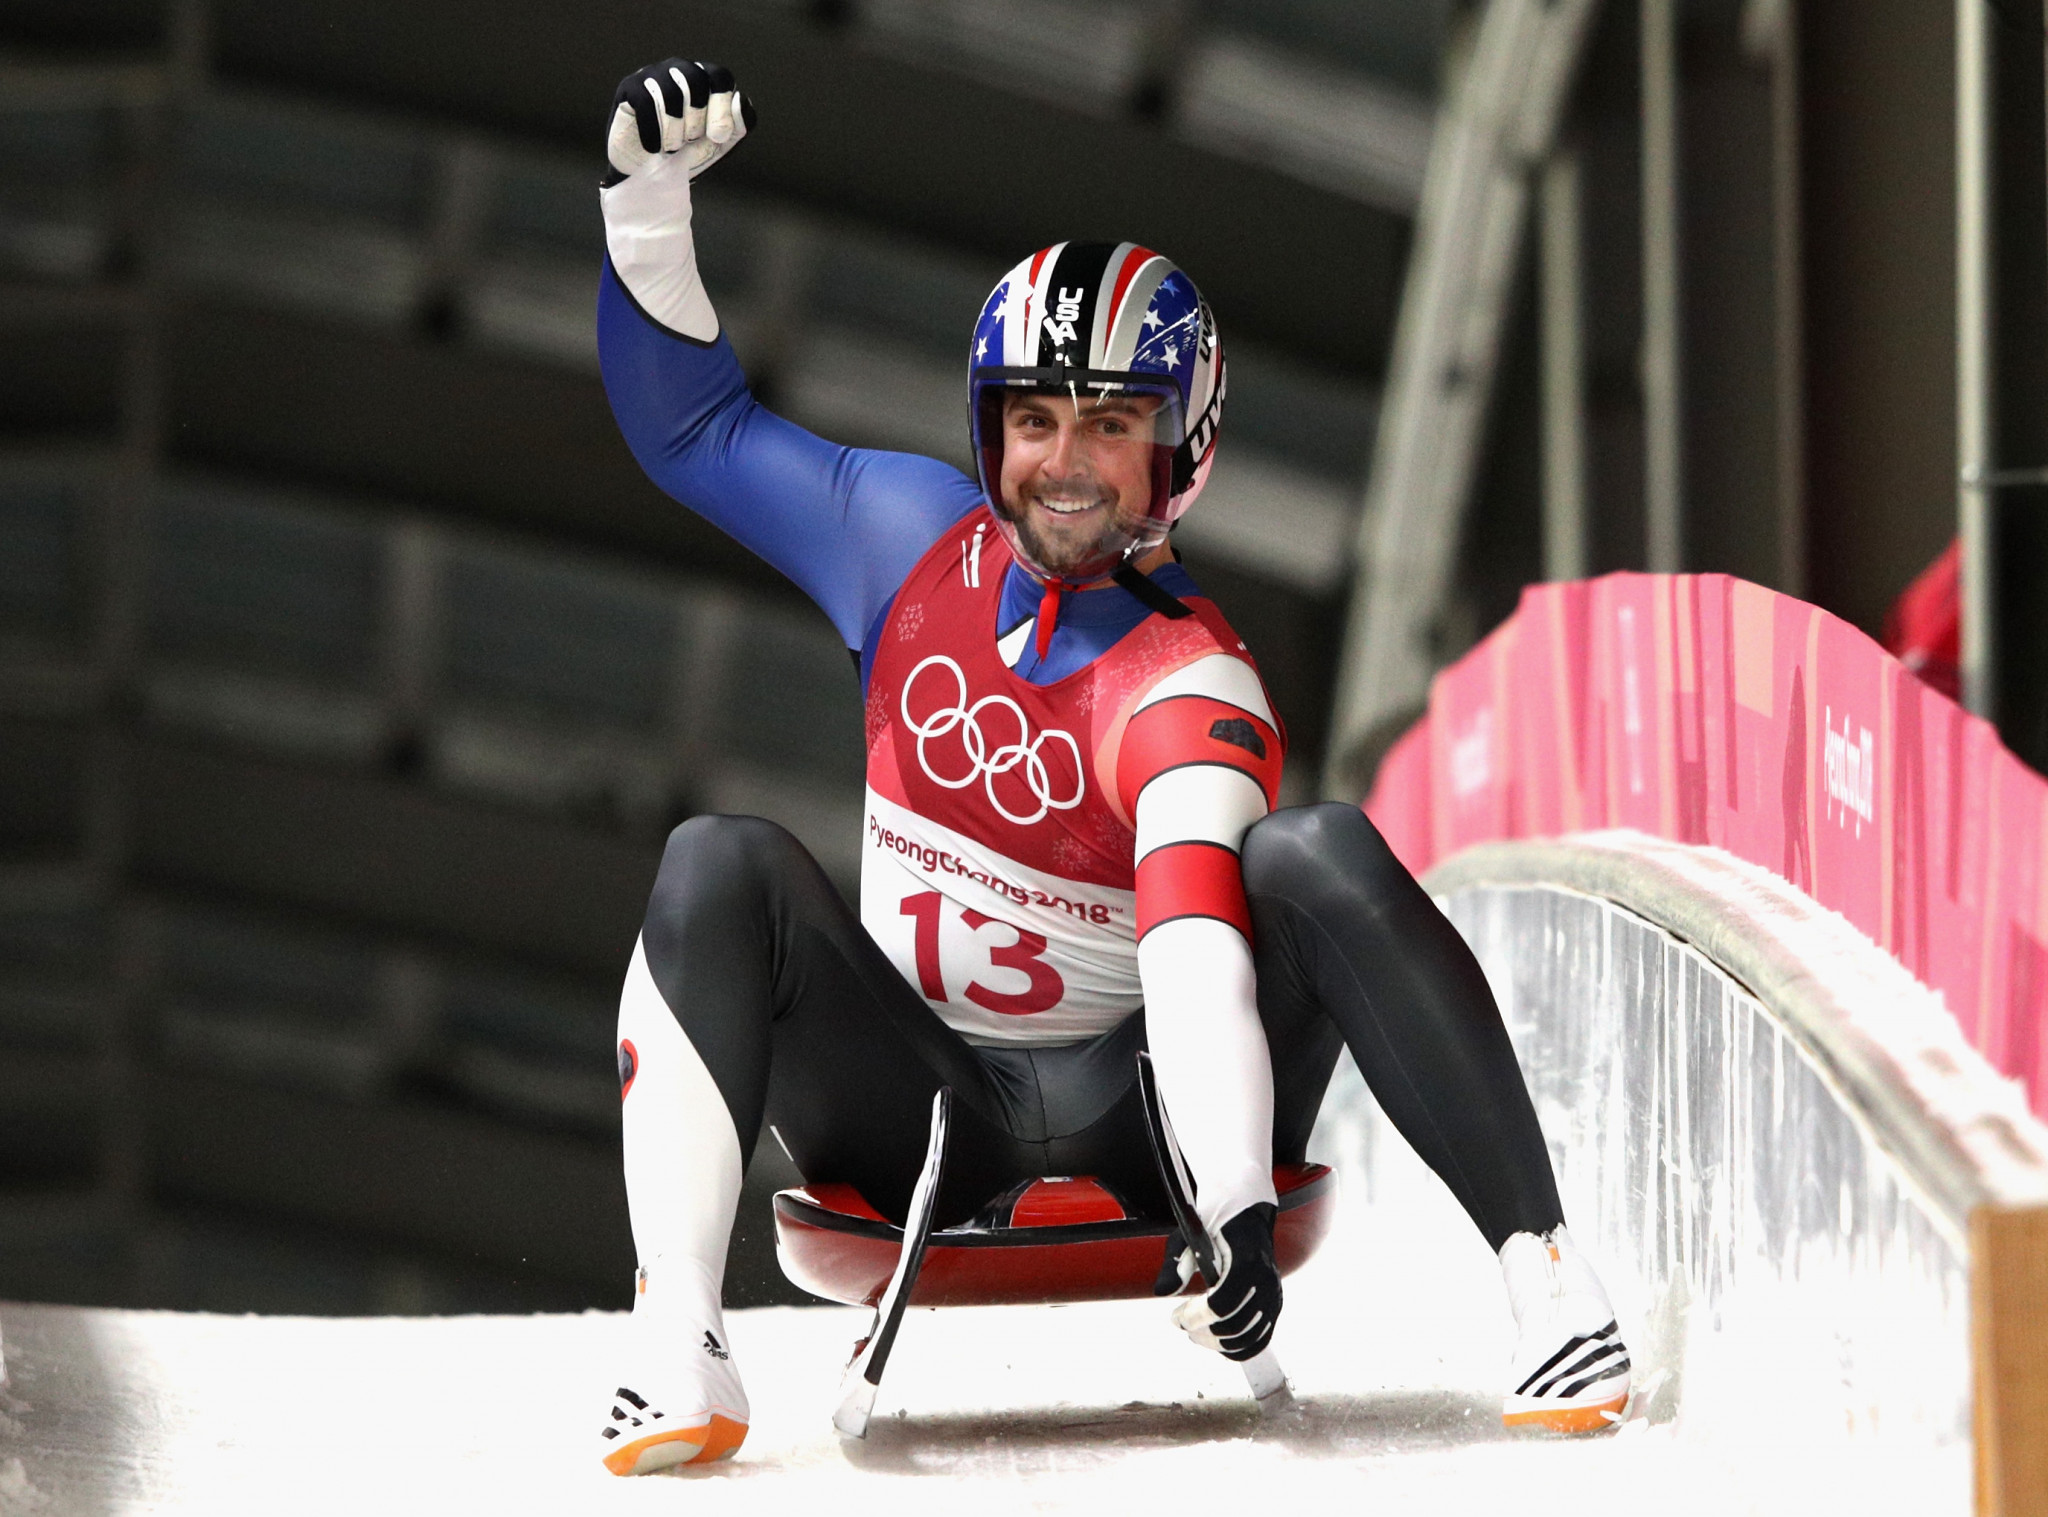 USA Luge to skip first four World Cups of new season over COVID fears